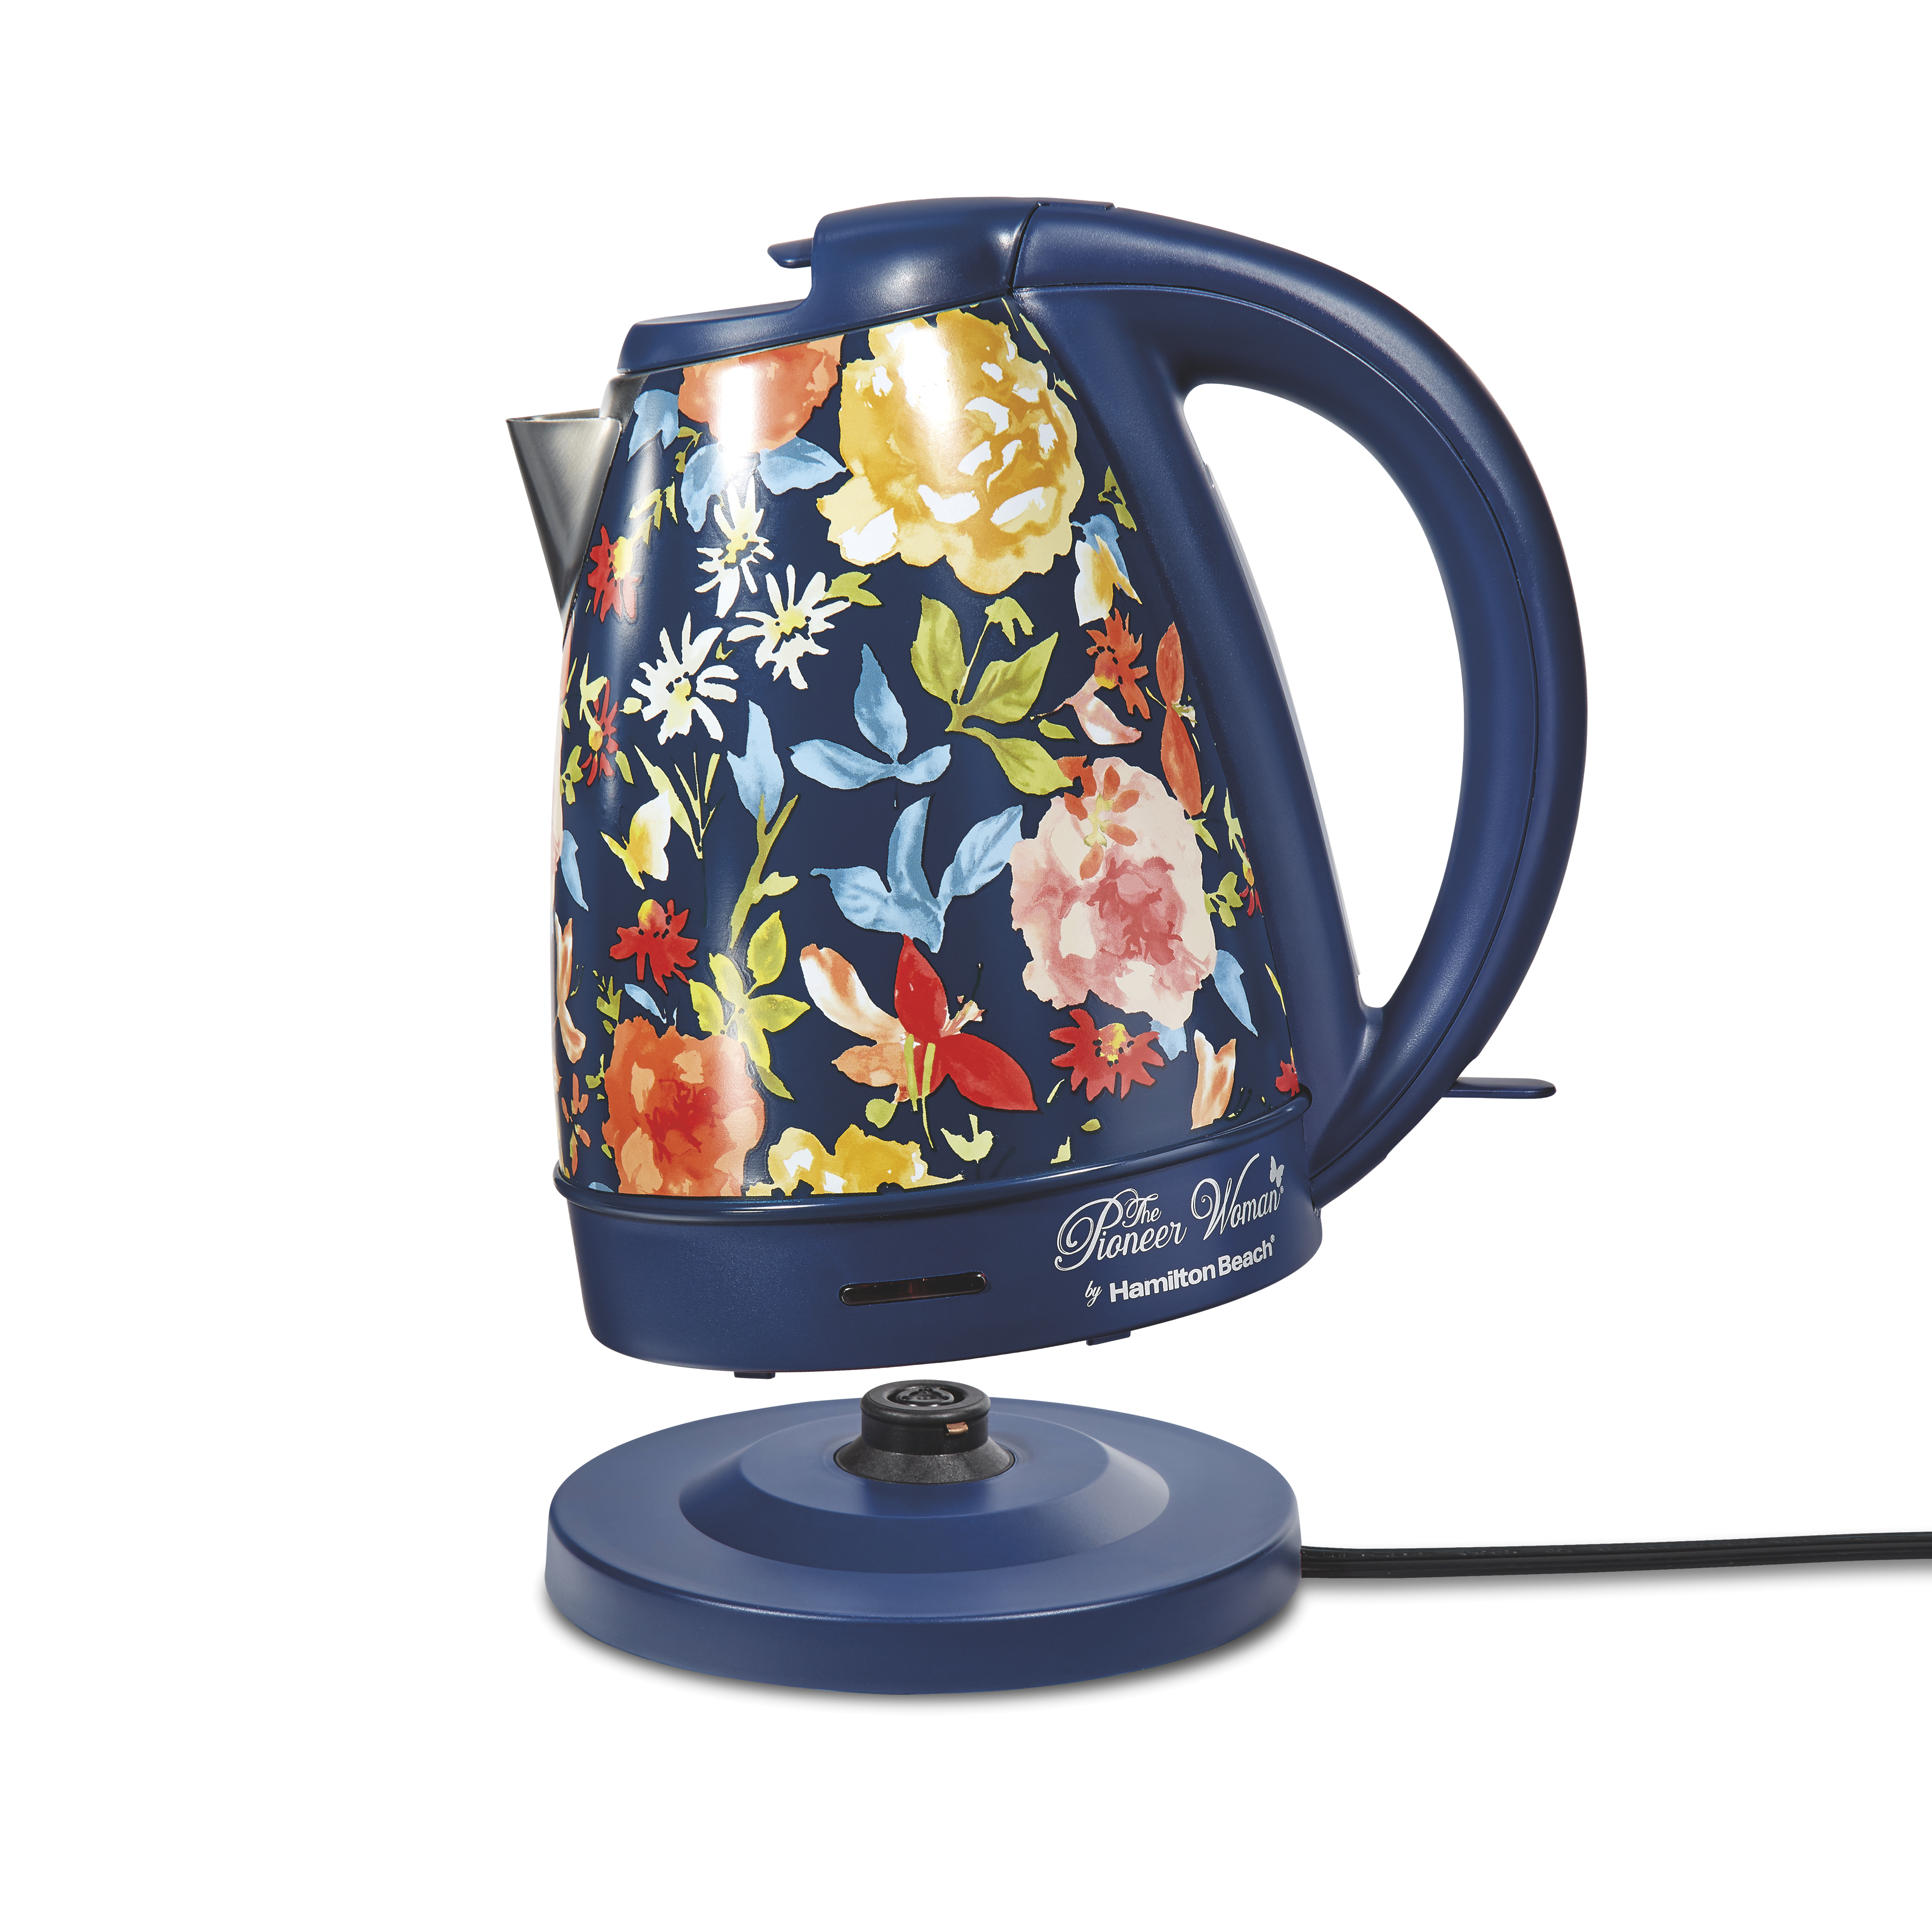 The Pioneer Woman 1.7 Liter Electric Kettle, Fiona Floral Blue, 40971 - image 3 of 6